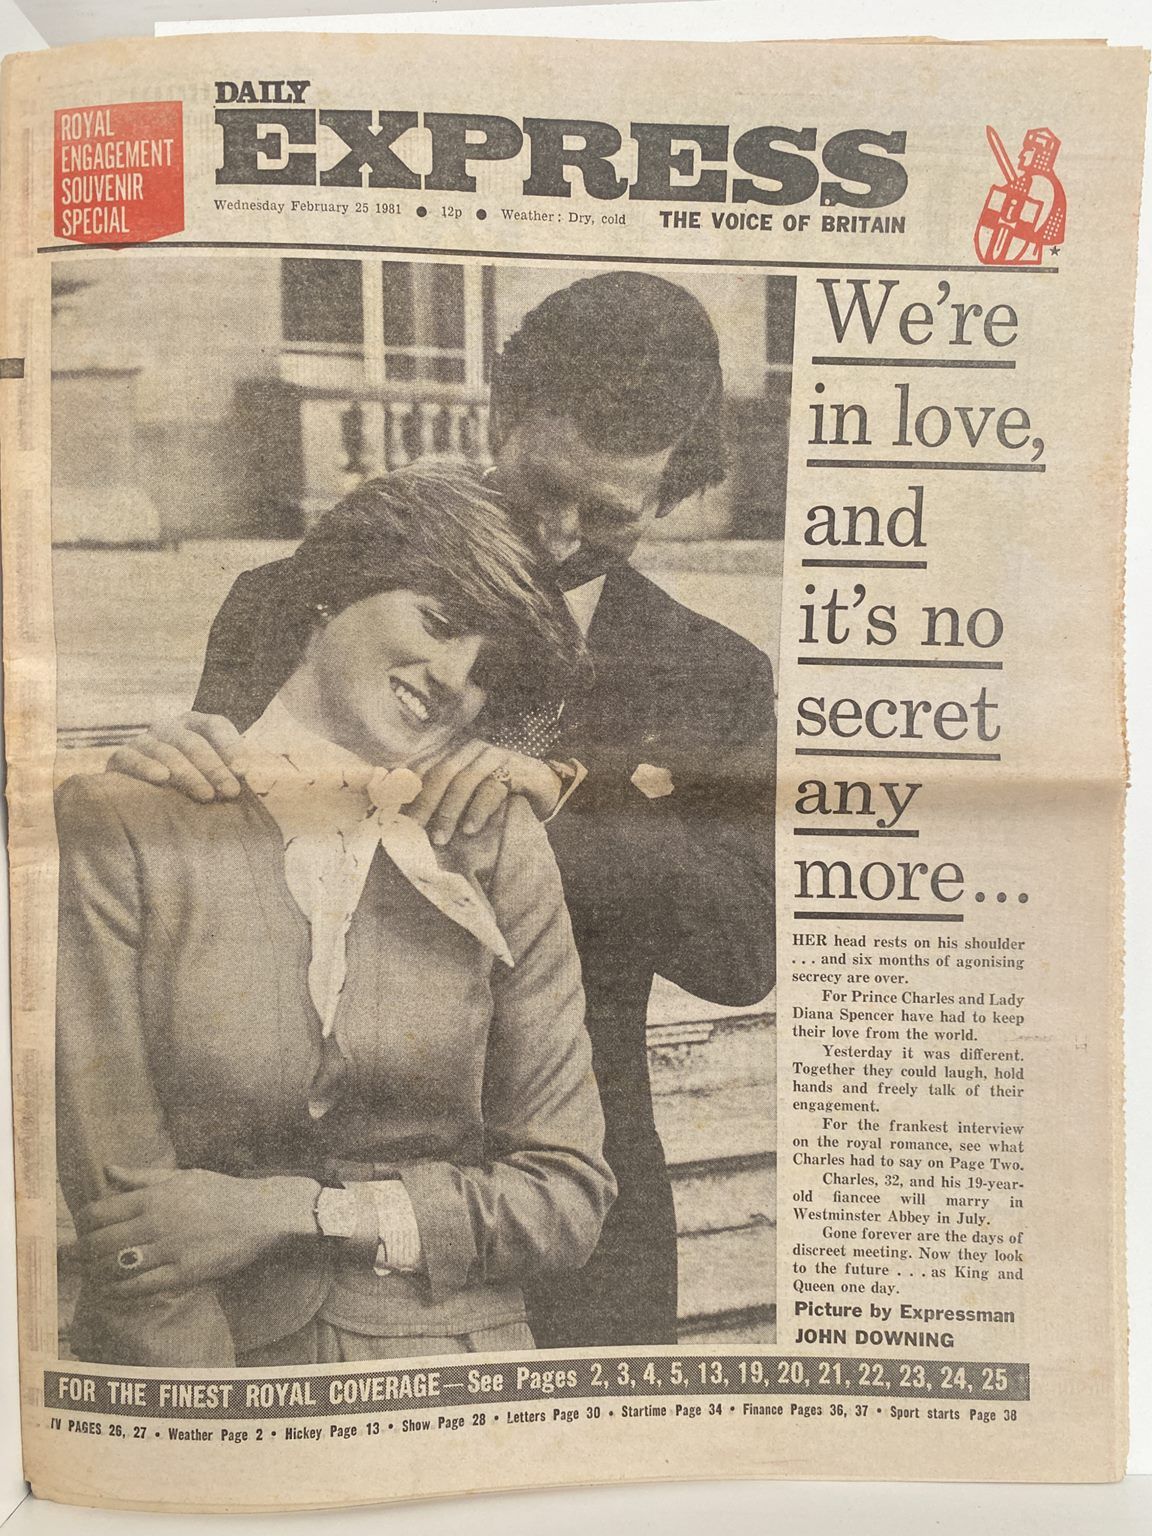 OLD NEWSPAPER: Daily Express, 25 February 1981 - Charles and Diana engaged